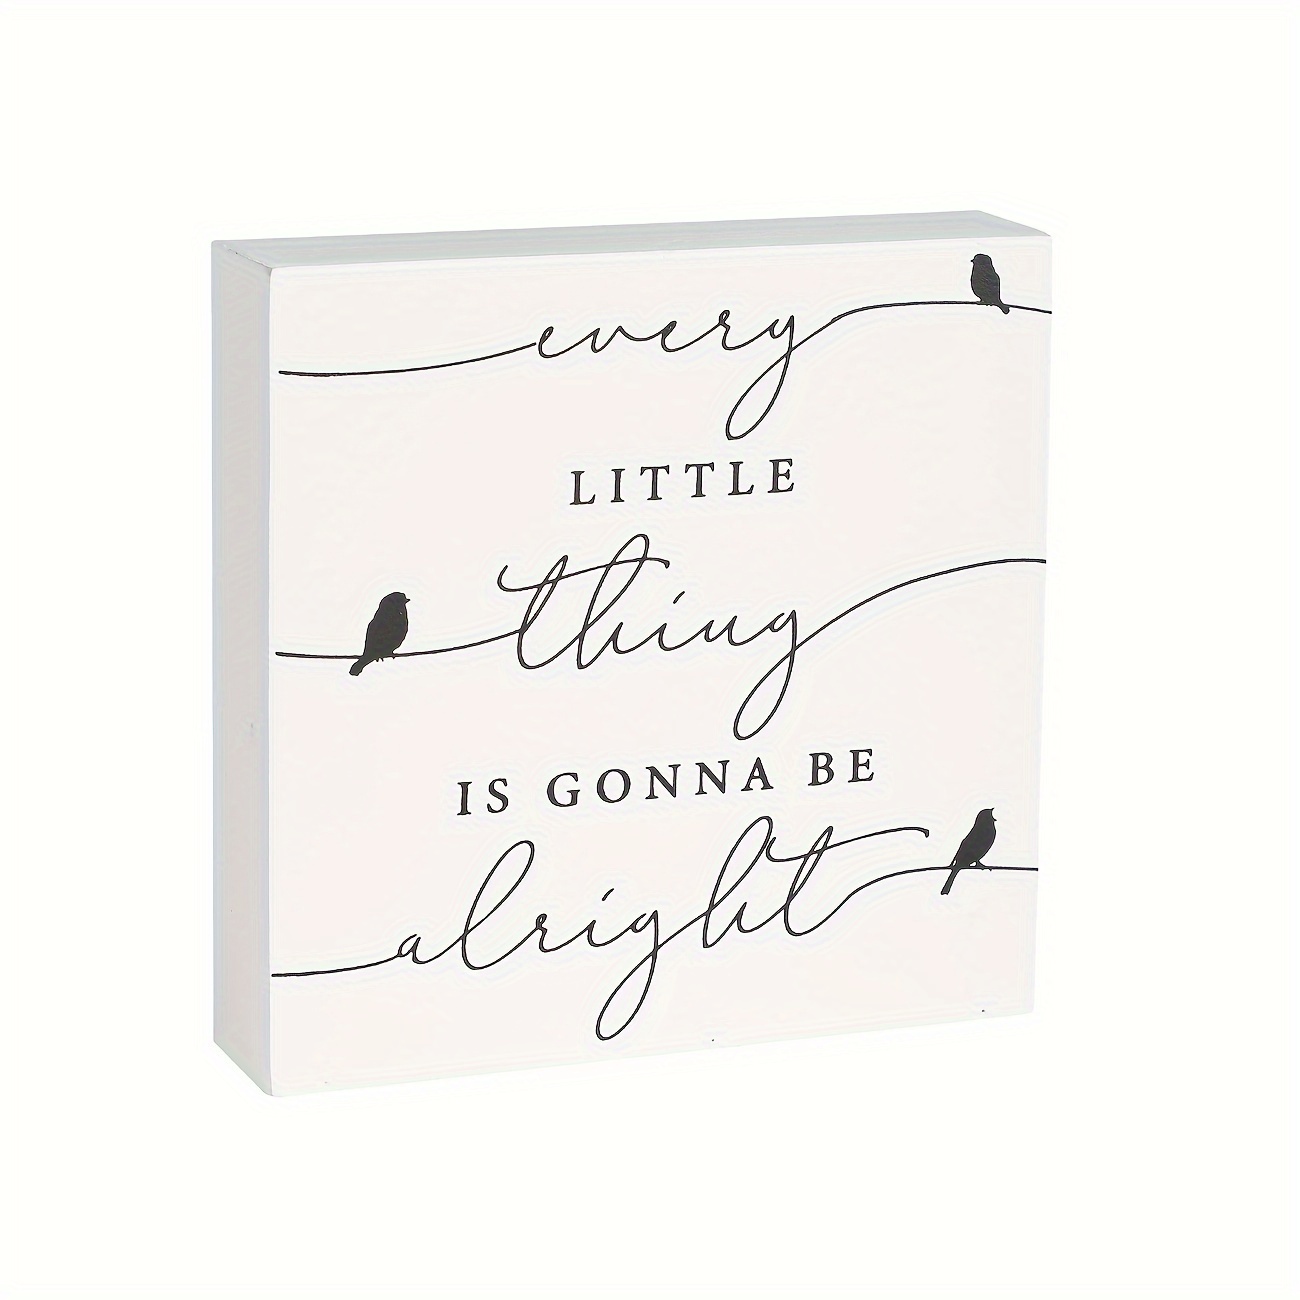 

1pc Every Little Thing Is Gonna Be Alright Birds Wooden Box Sign, Farmhouse Wood Box Sign, Spring Art Blocks Desk Shelf Tabletop Home Room Decor 5 X 5 Inch